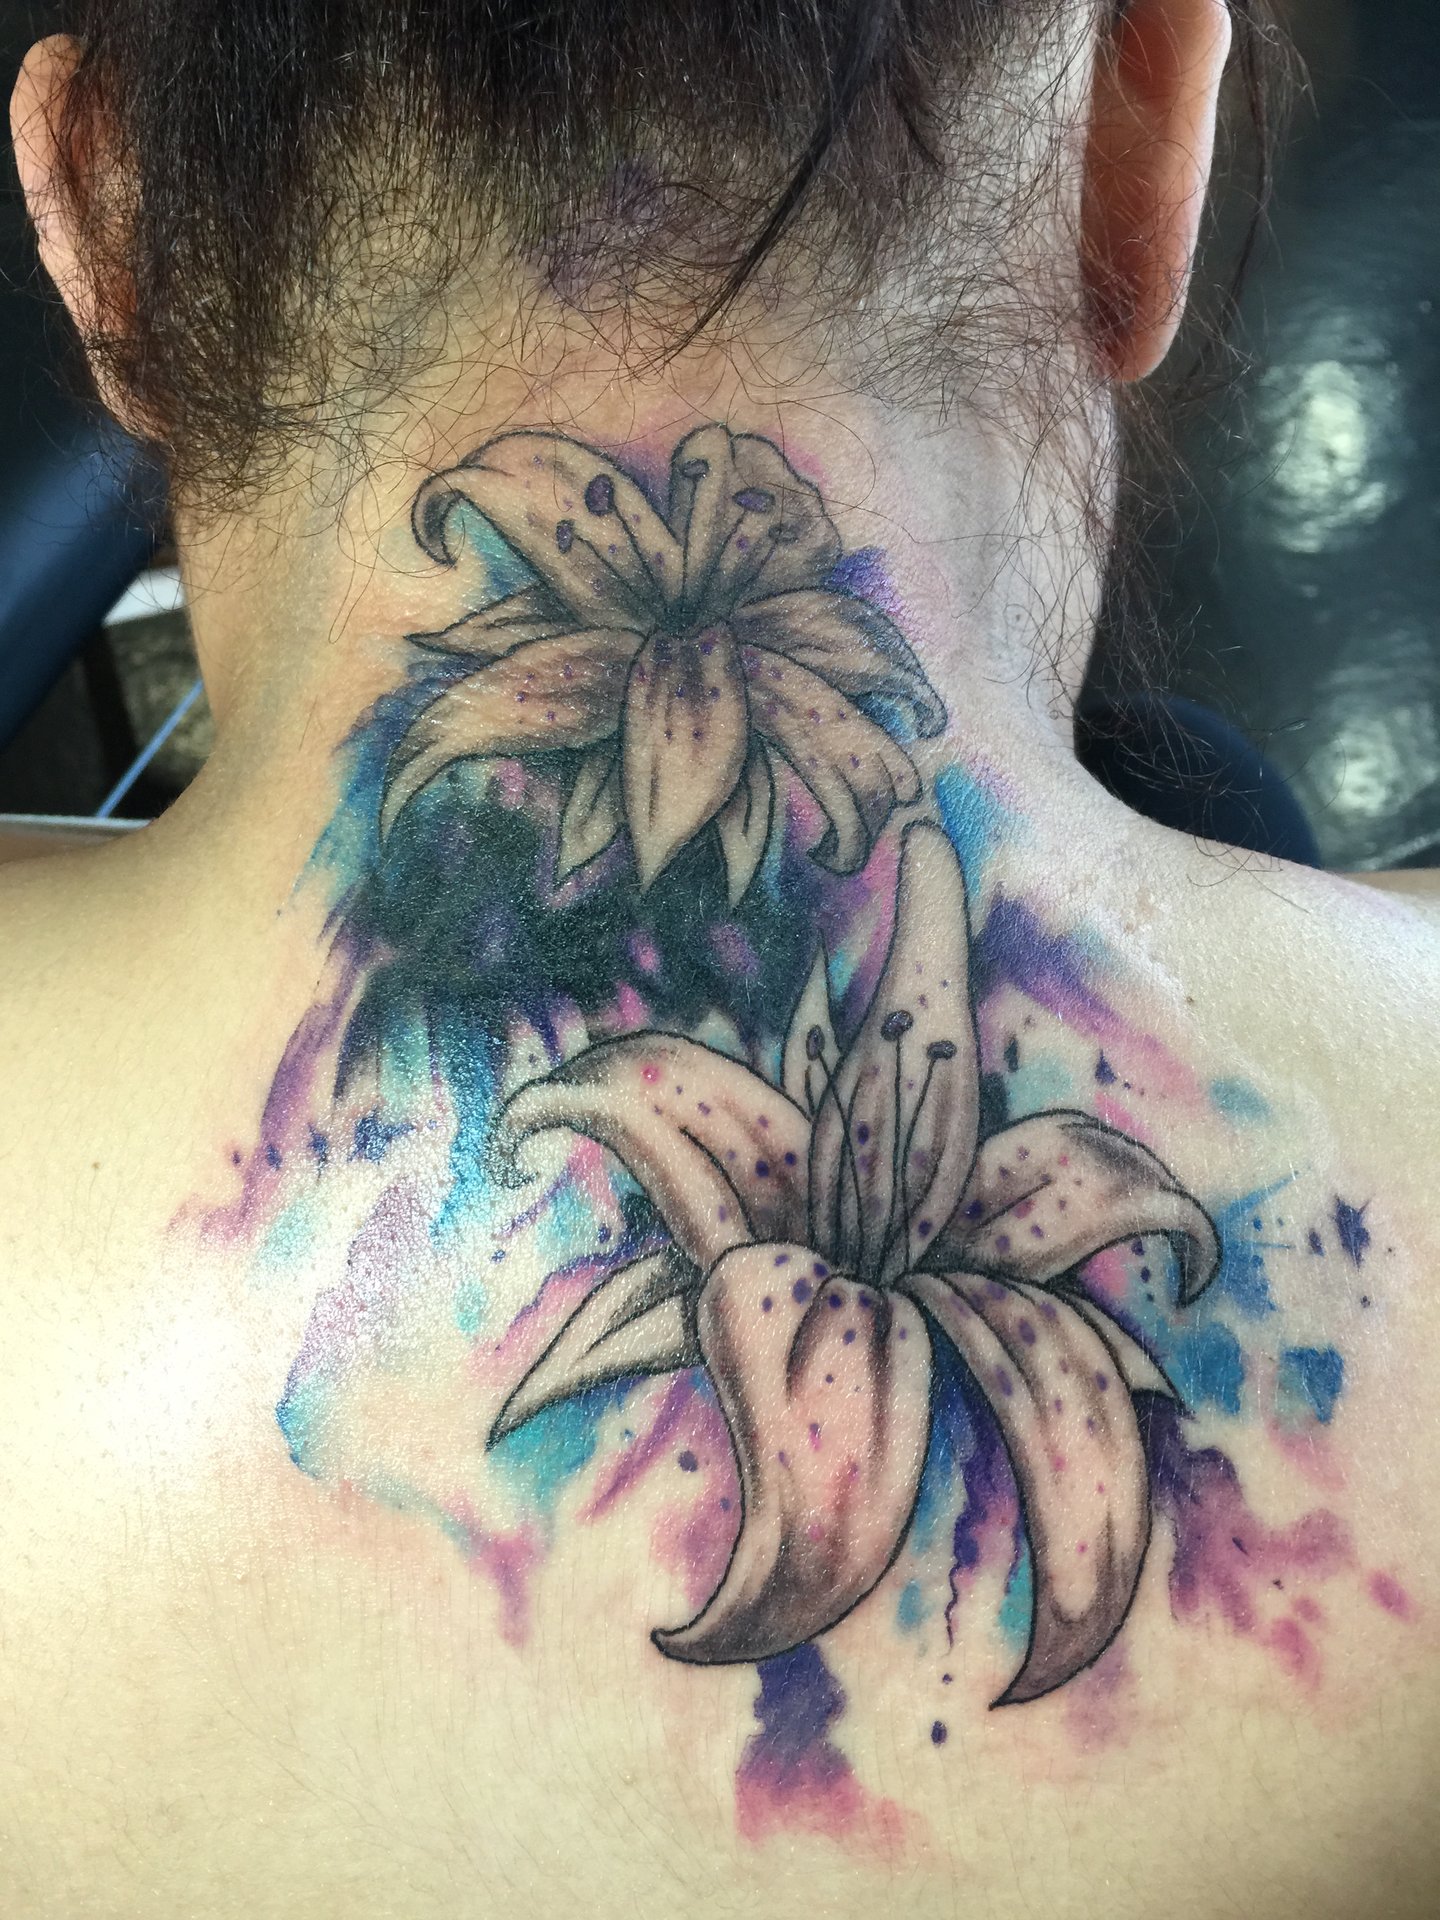 Honorable Society on Twitter Amazing watercolor tattoo by Monty  watercolortattoo tigerlily flowers art tattoos weho  httptcoHcBGRZUPUe  X